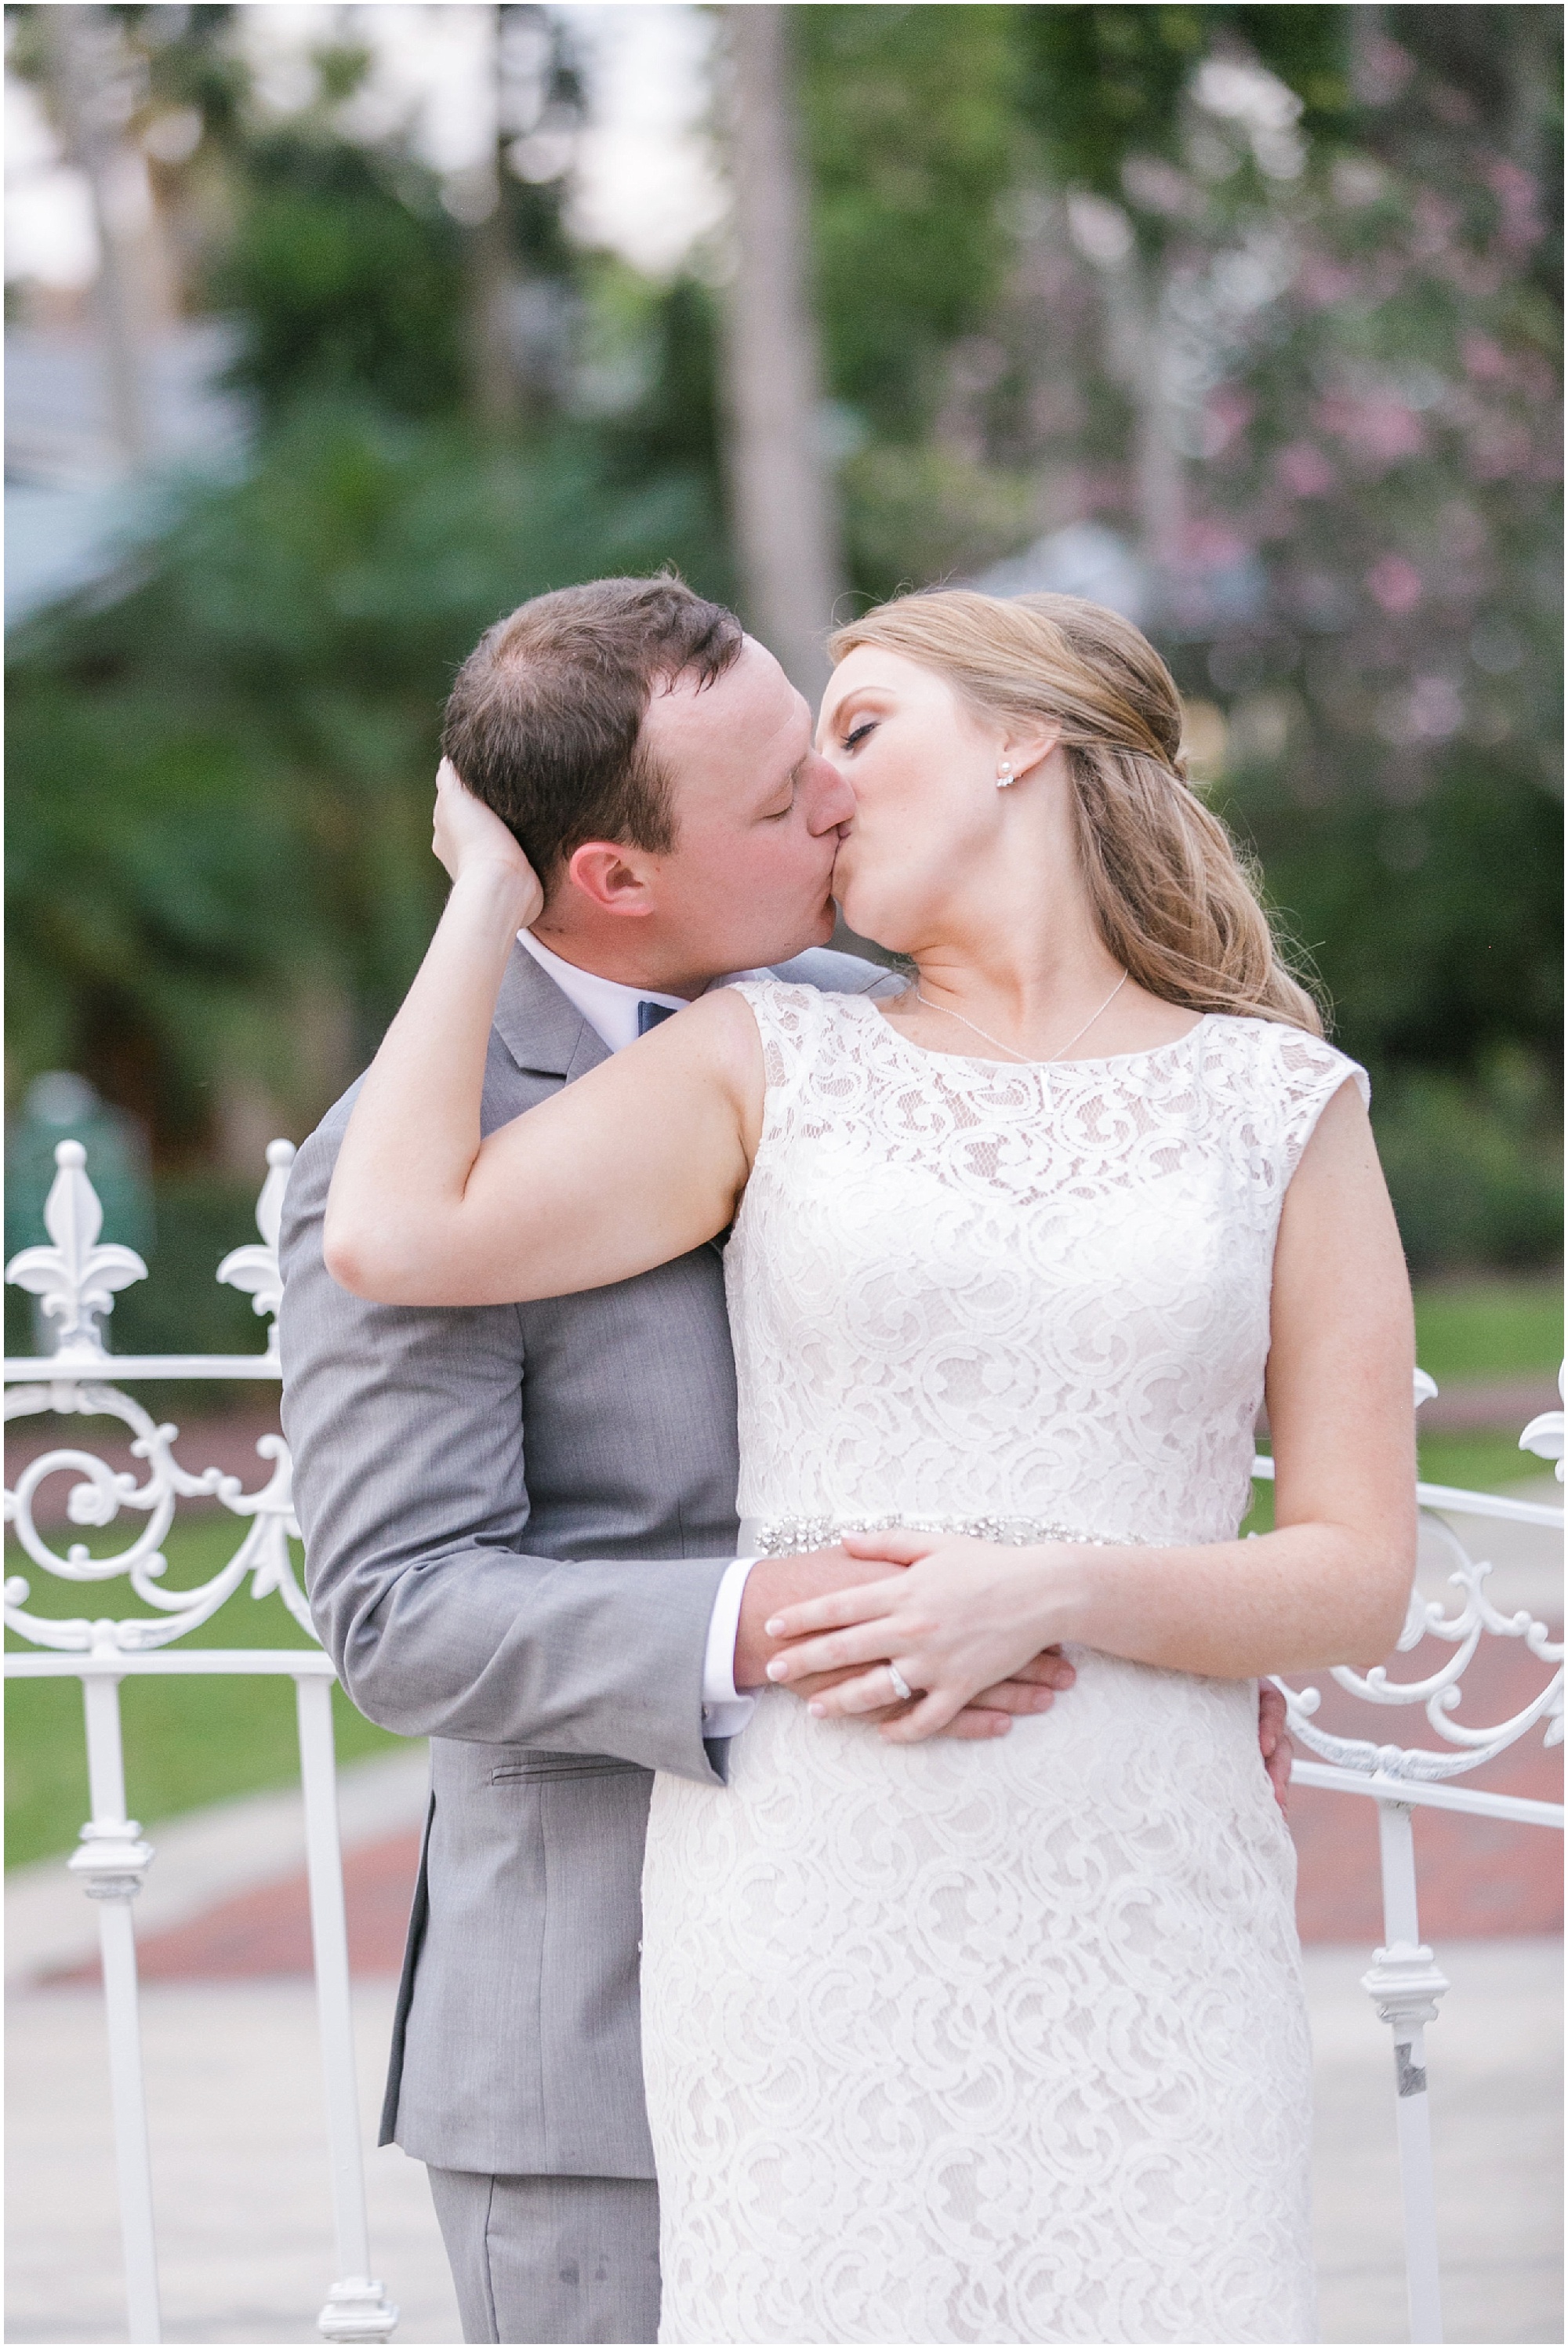 Bride and groom kissing each other with a white iron fence behind them.